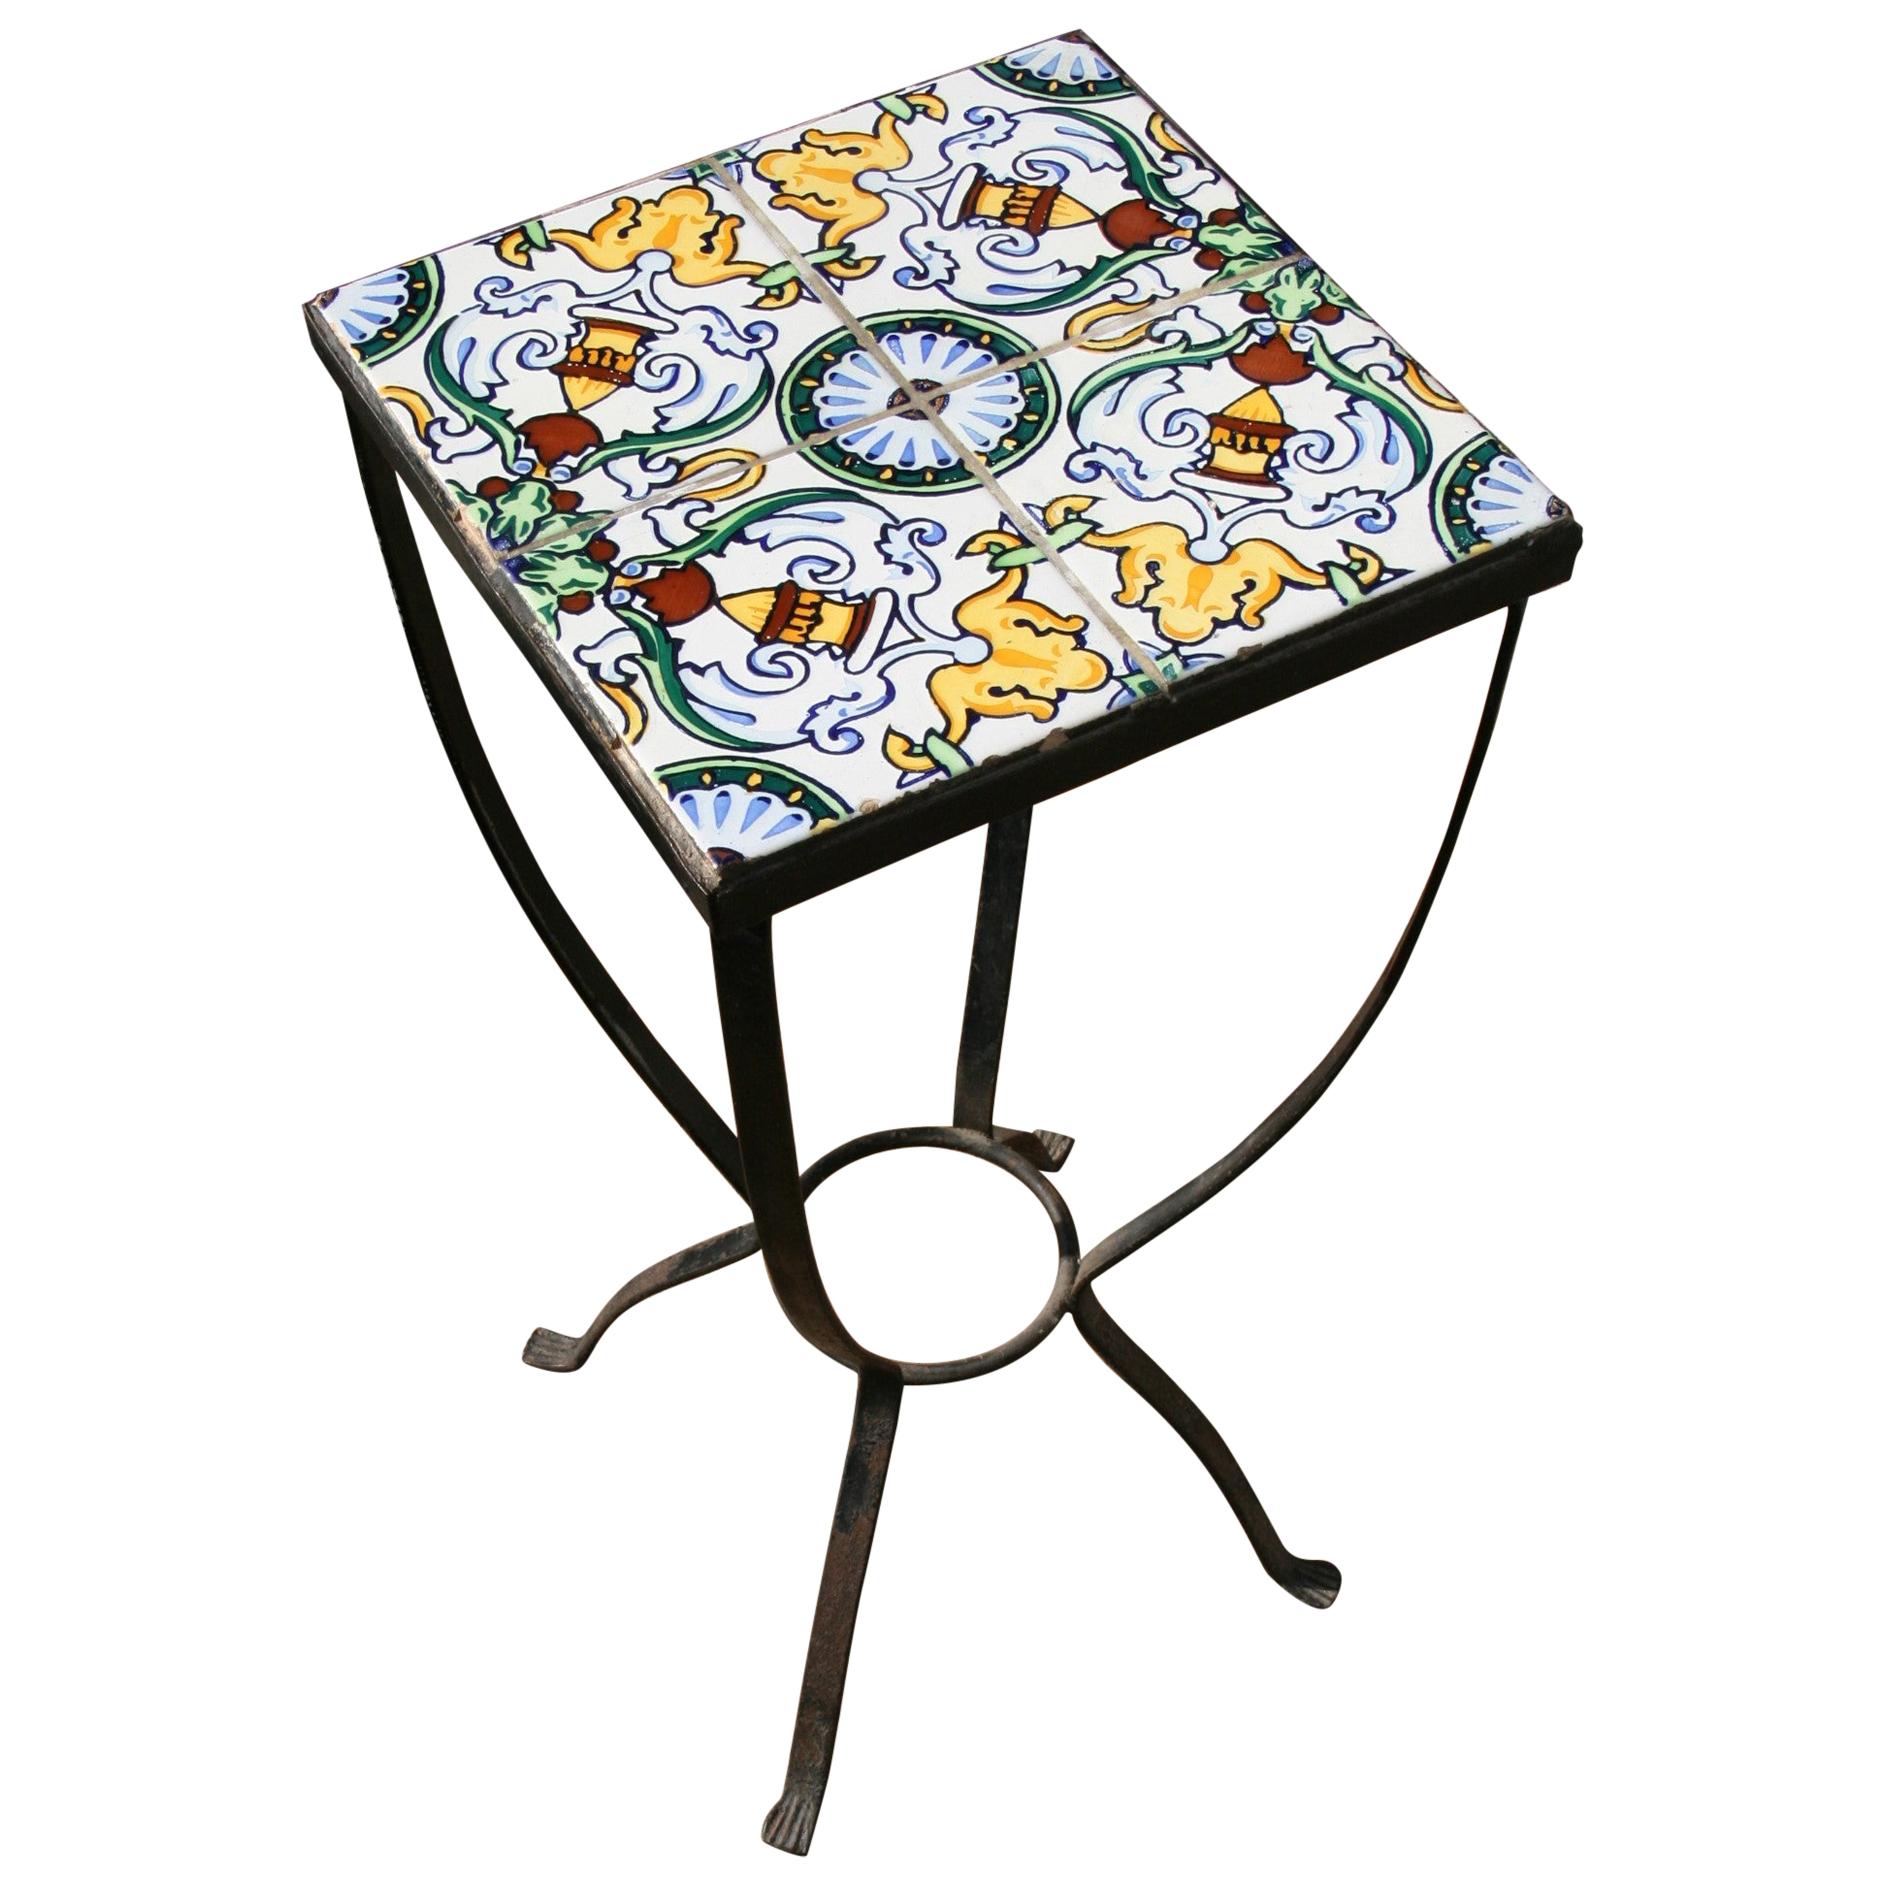 Italian Garden Hand Painted Tile and Metal Plant Stand/Drink Table